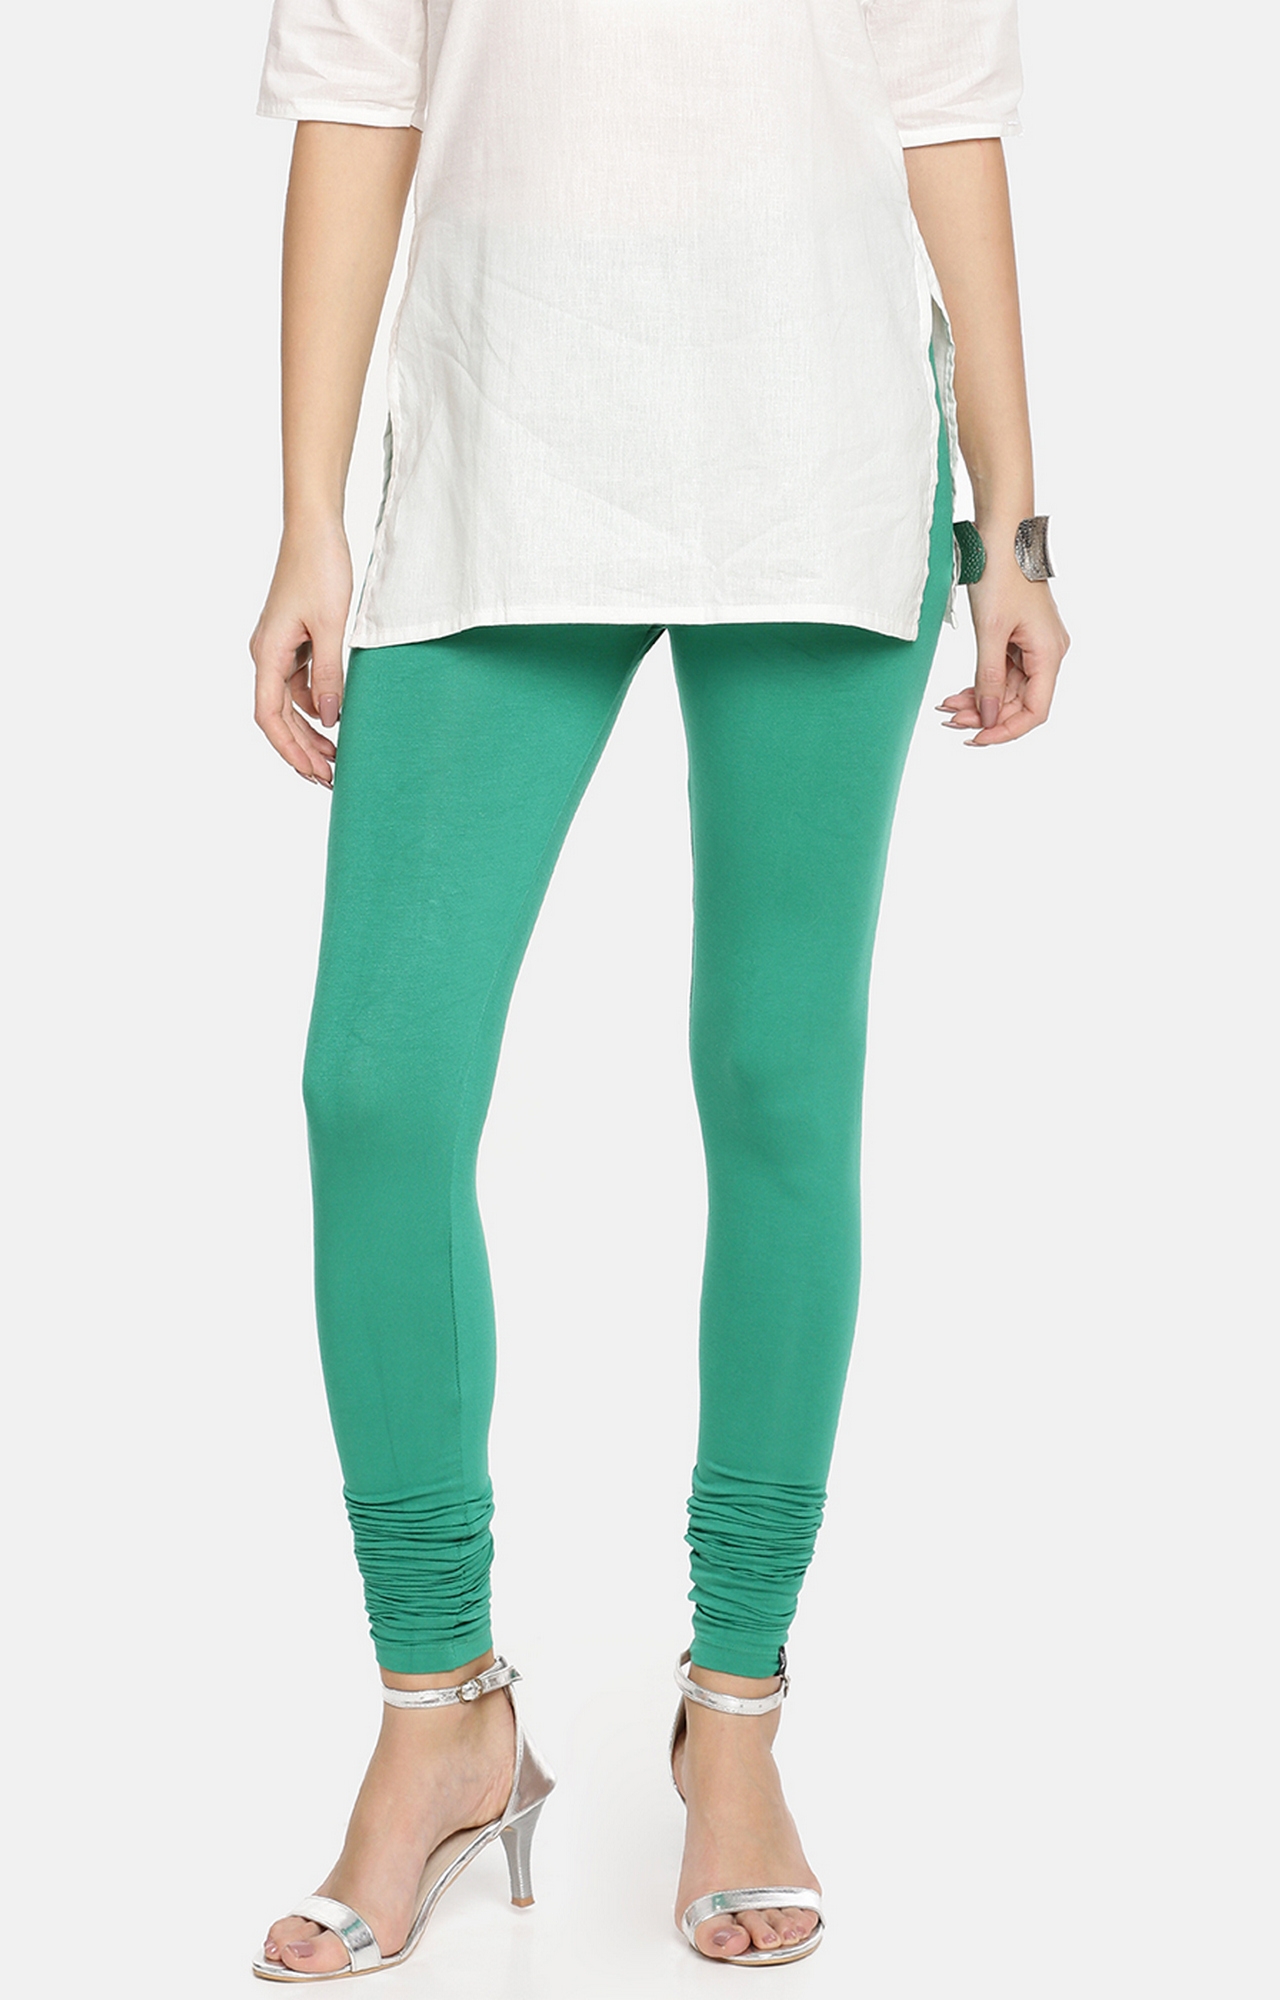 Twin Birds Online - Get fashionable with capri leggings from Twin Birds,  available in a multitude of vibrant colors and sizes. Visit twinbirds.co.in  or click on the product below to buy what